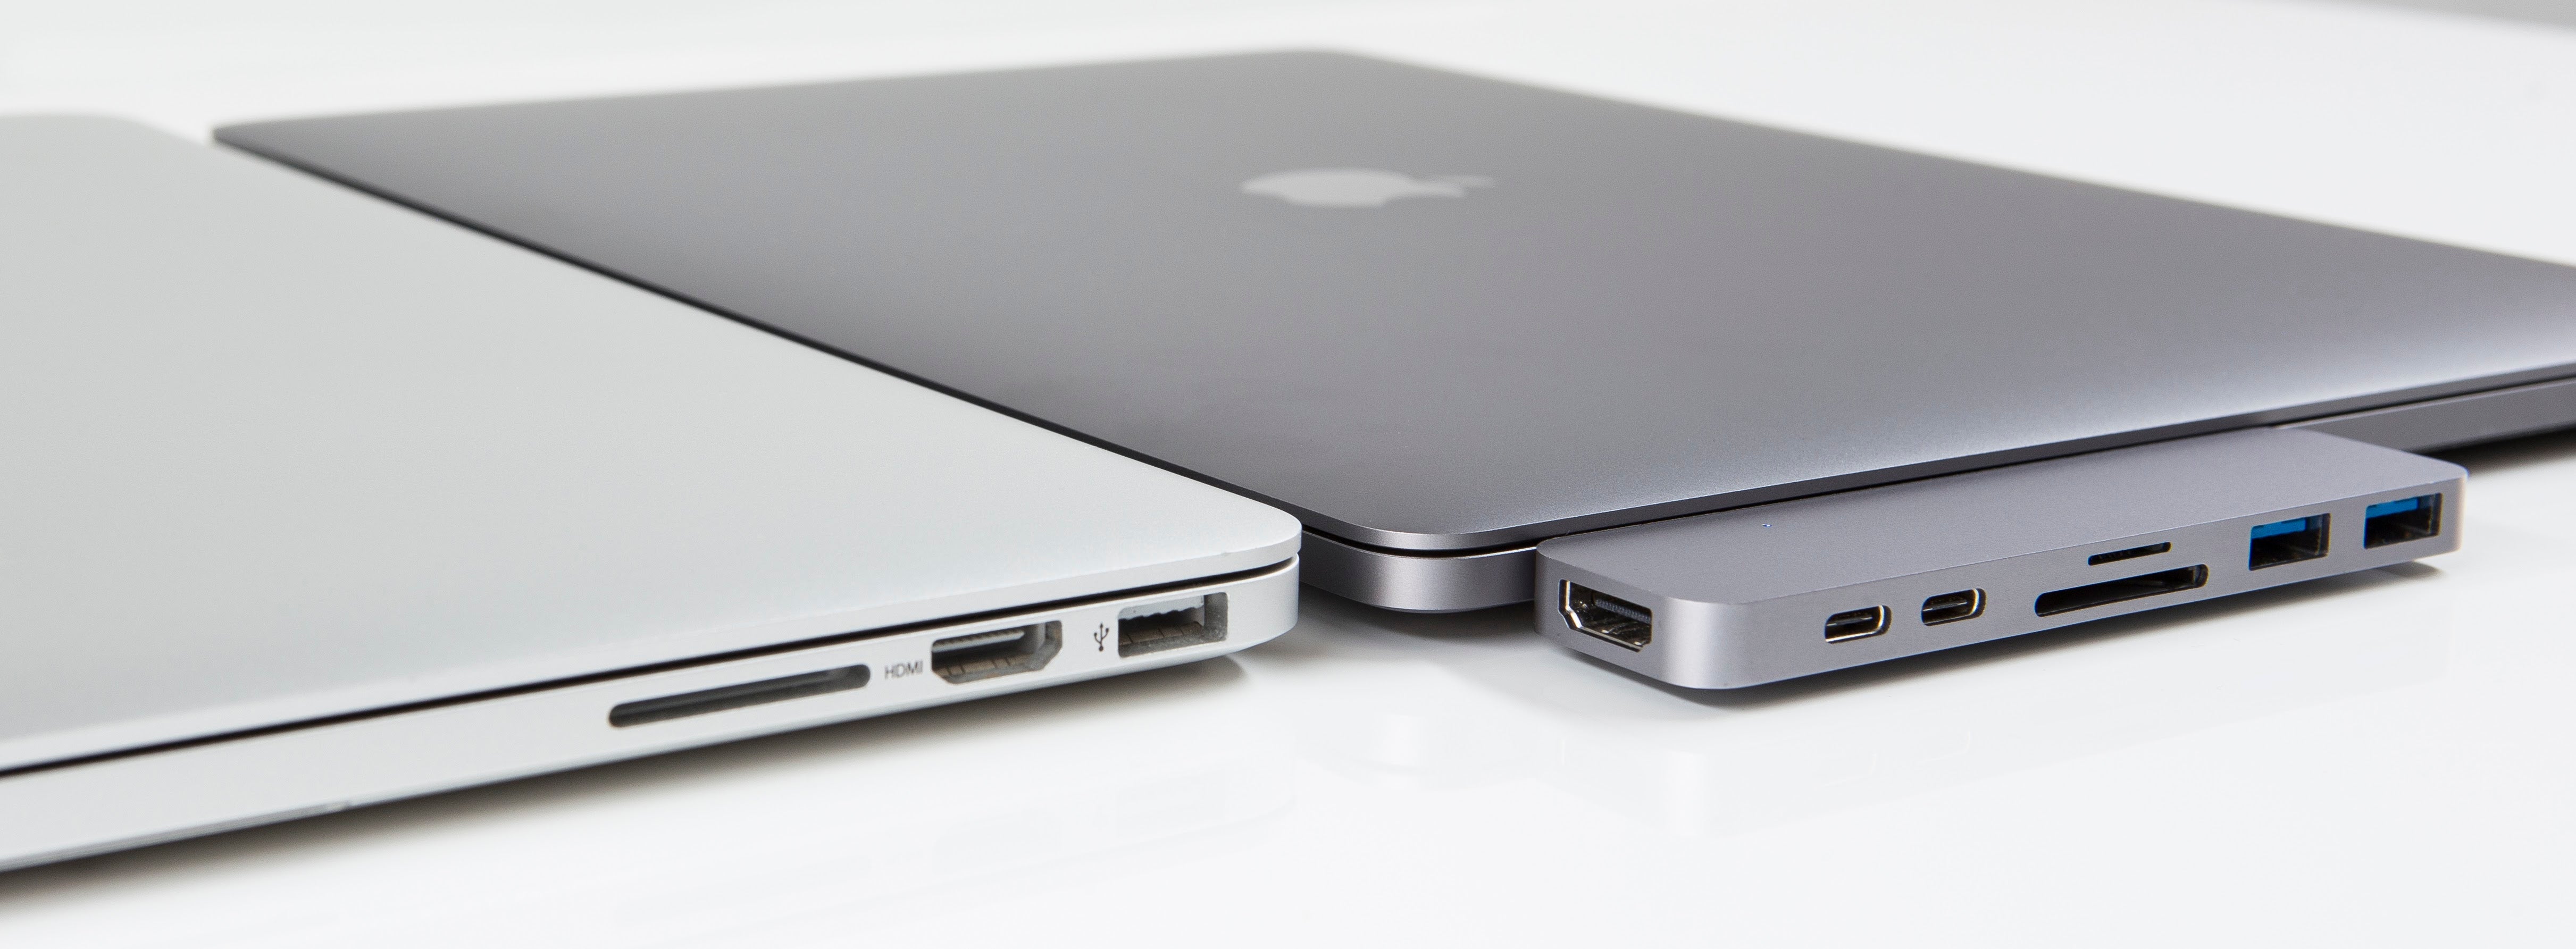 17000 people paid over $1.5M to give new MacBook Pro the same ports as the old one